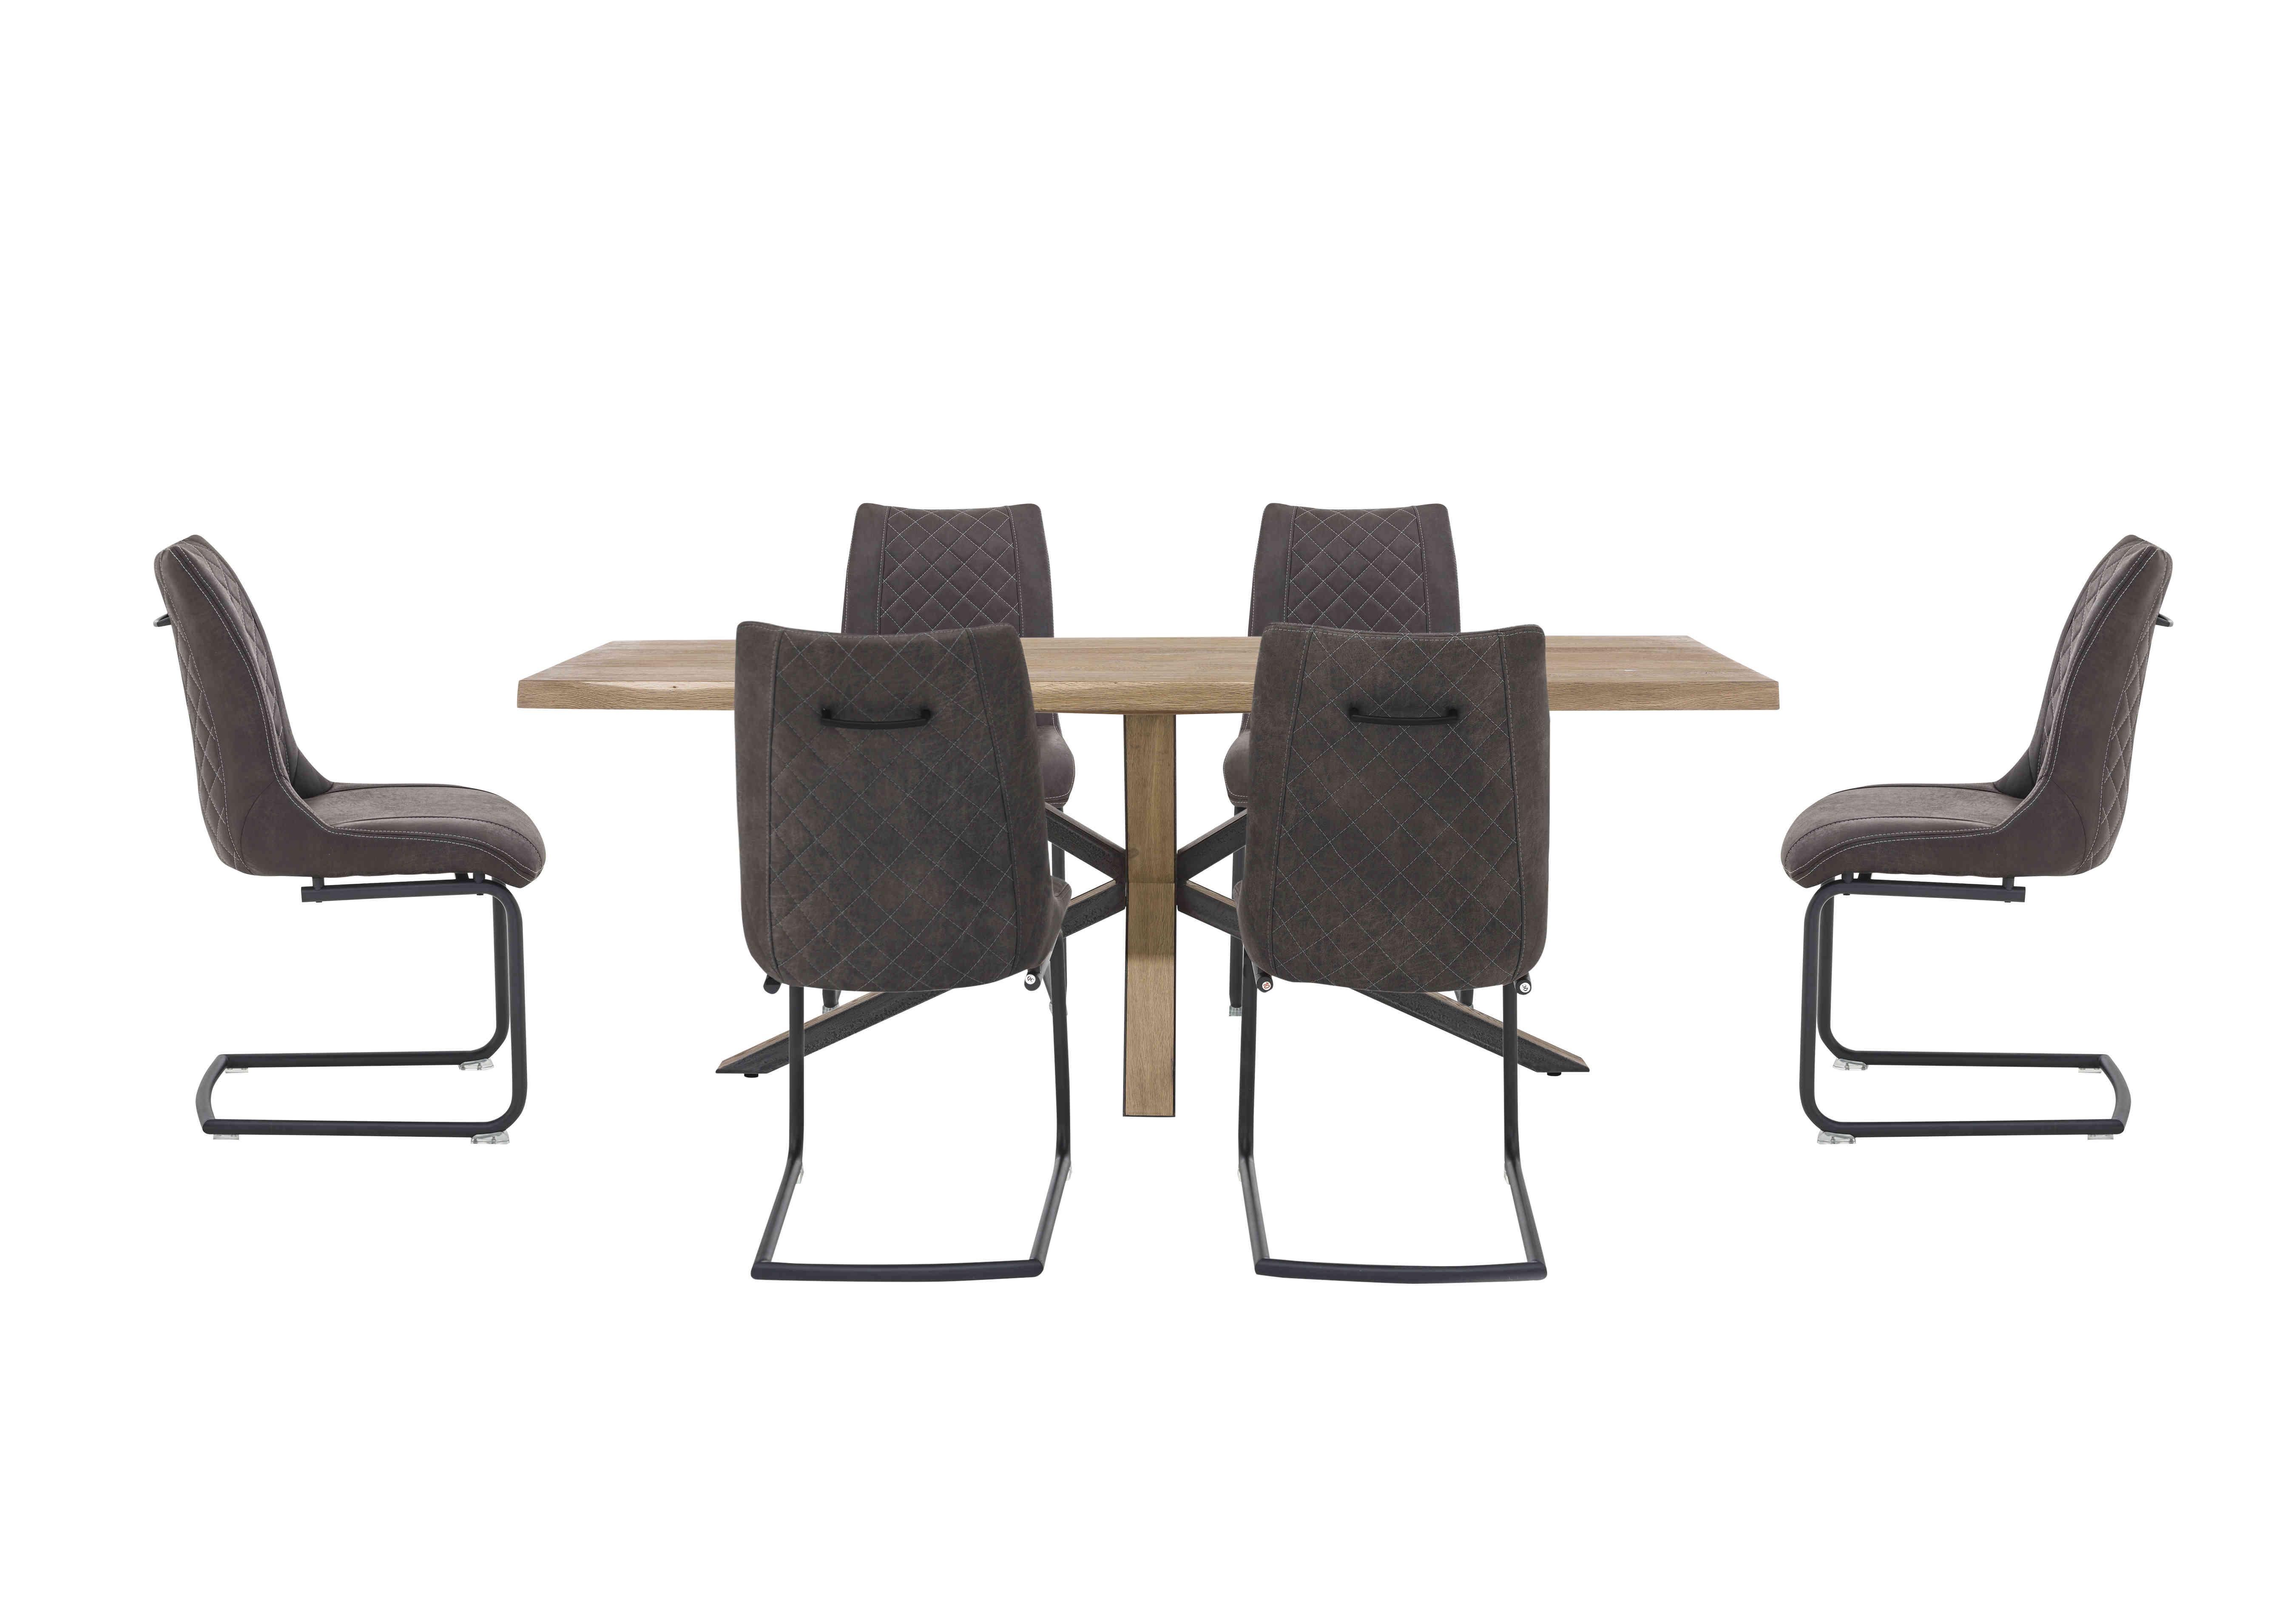 Detroit Starburst Leg Dining Table and 6 Baltimore Dining Chairs Dining Set in Anthracite on Furniture Village